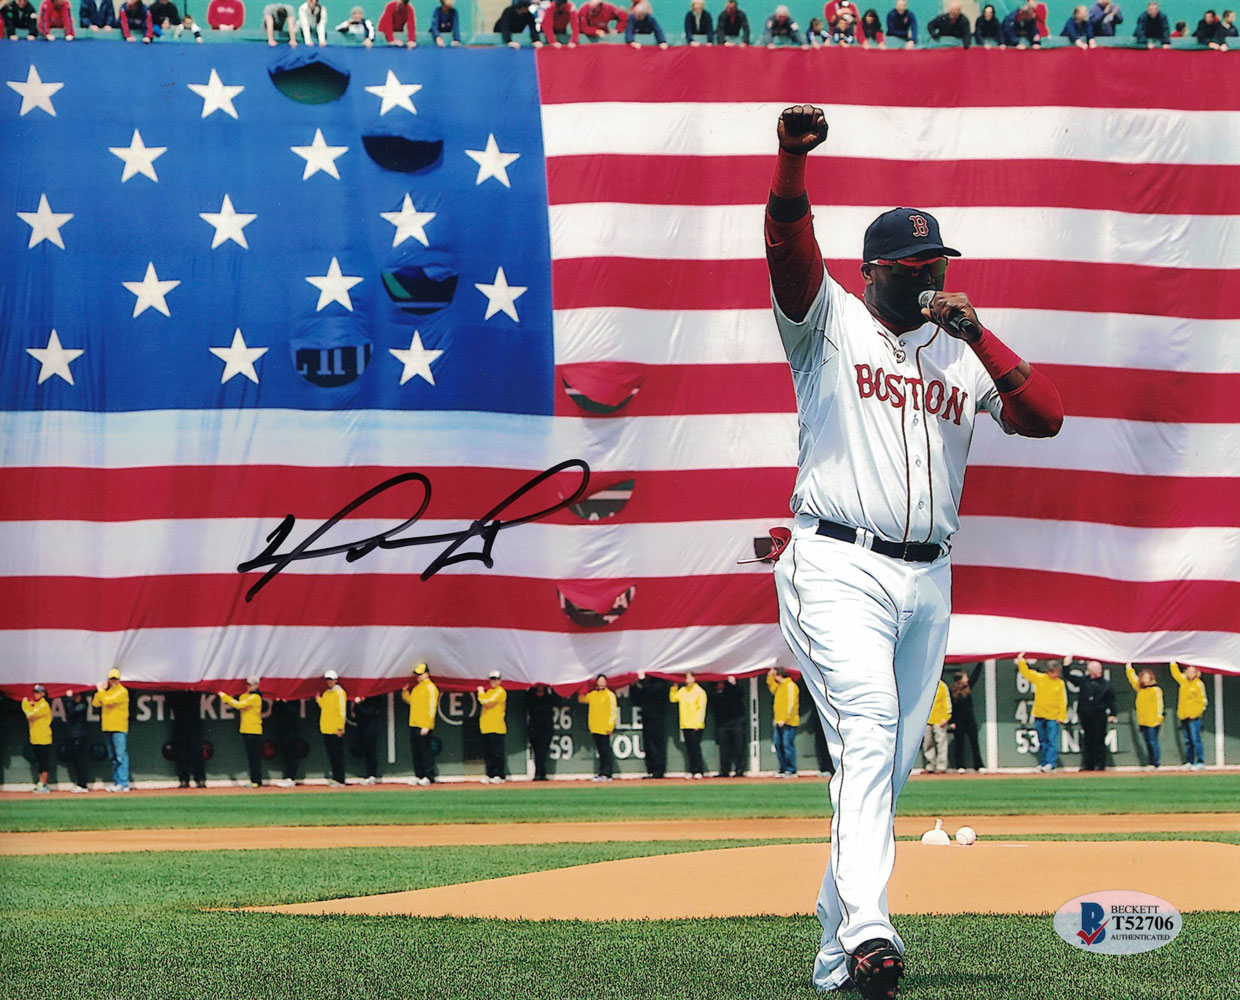 David Ortiz Autographed/Signed Boston Red Sox 8x10 Photo BAS 26876